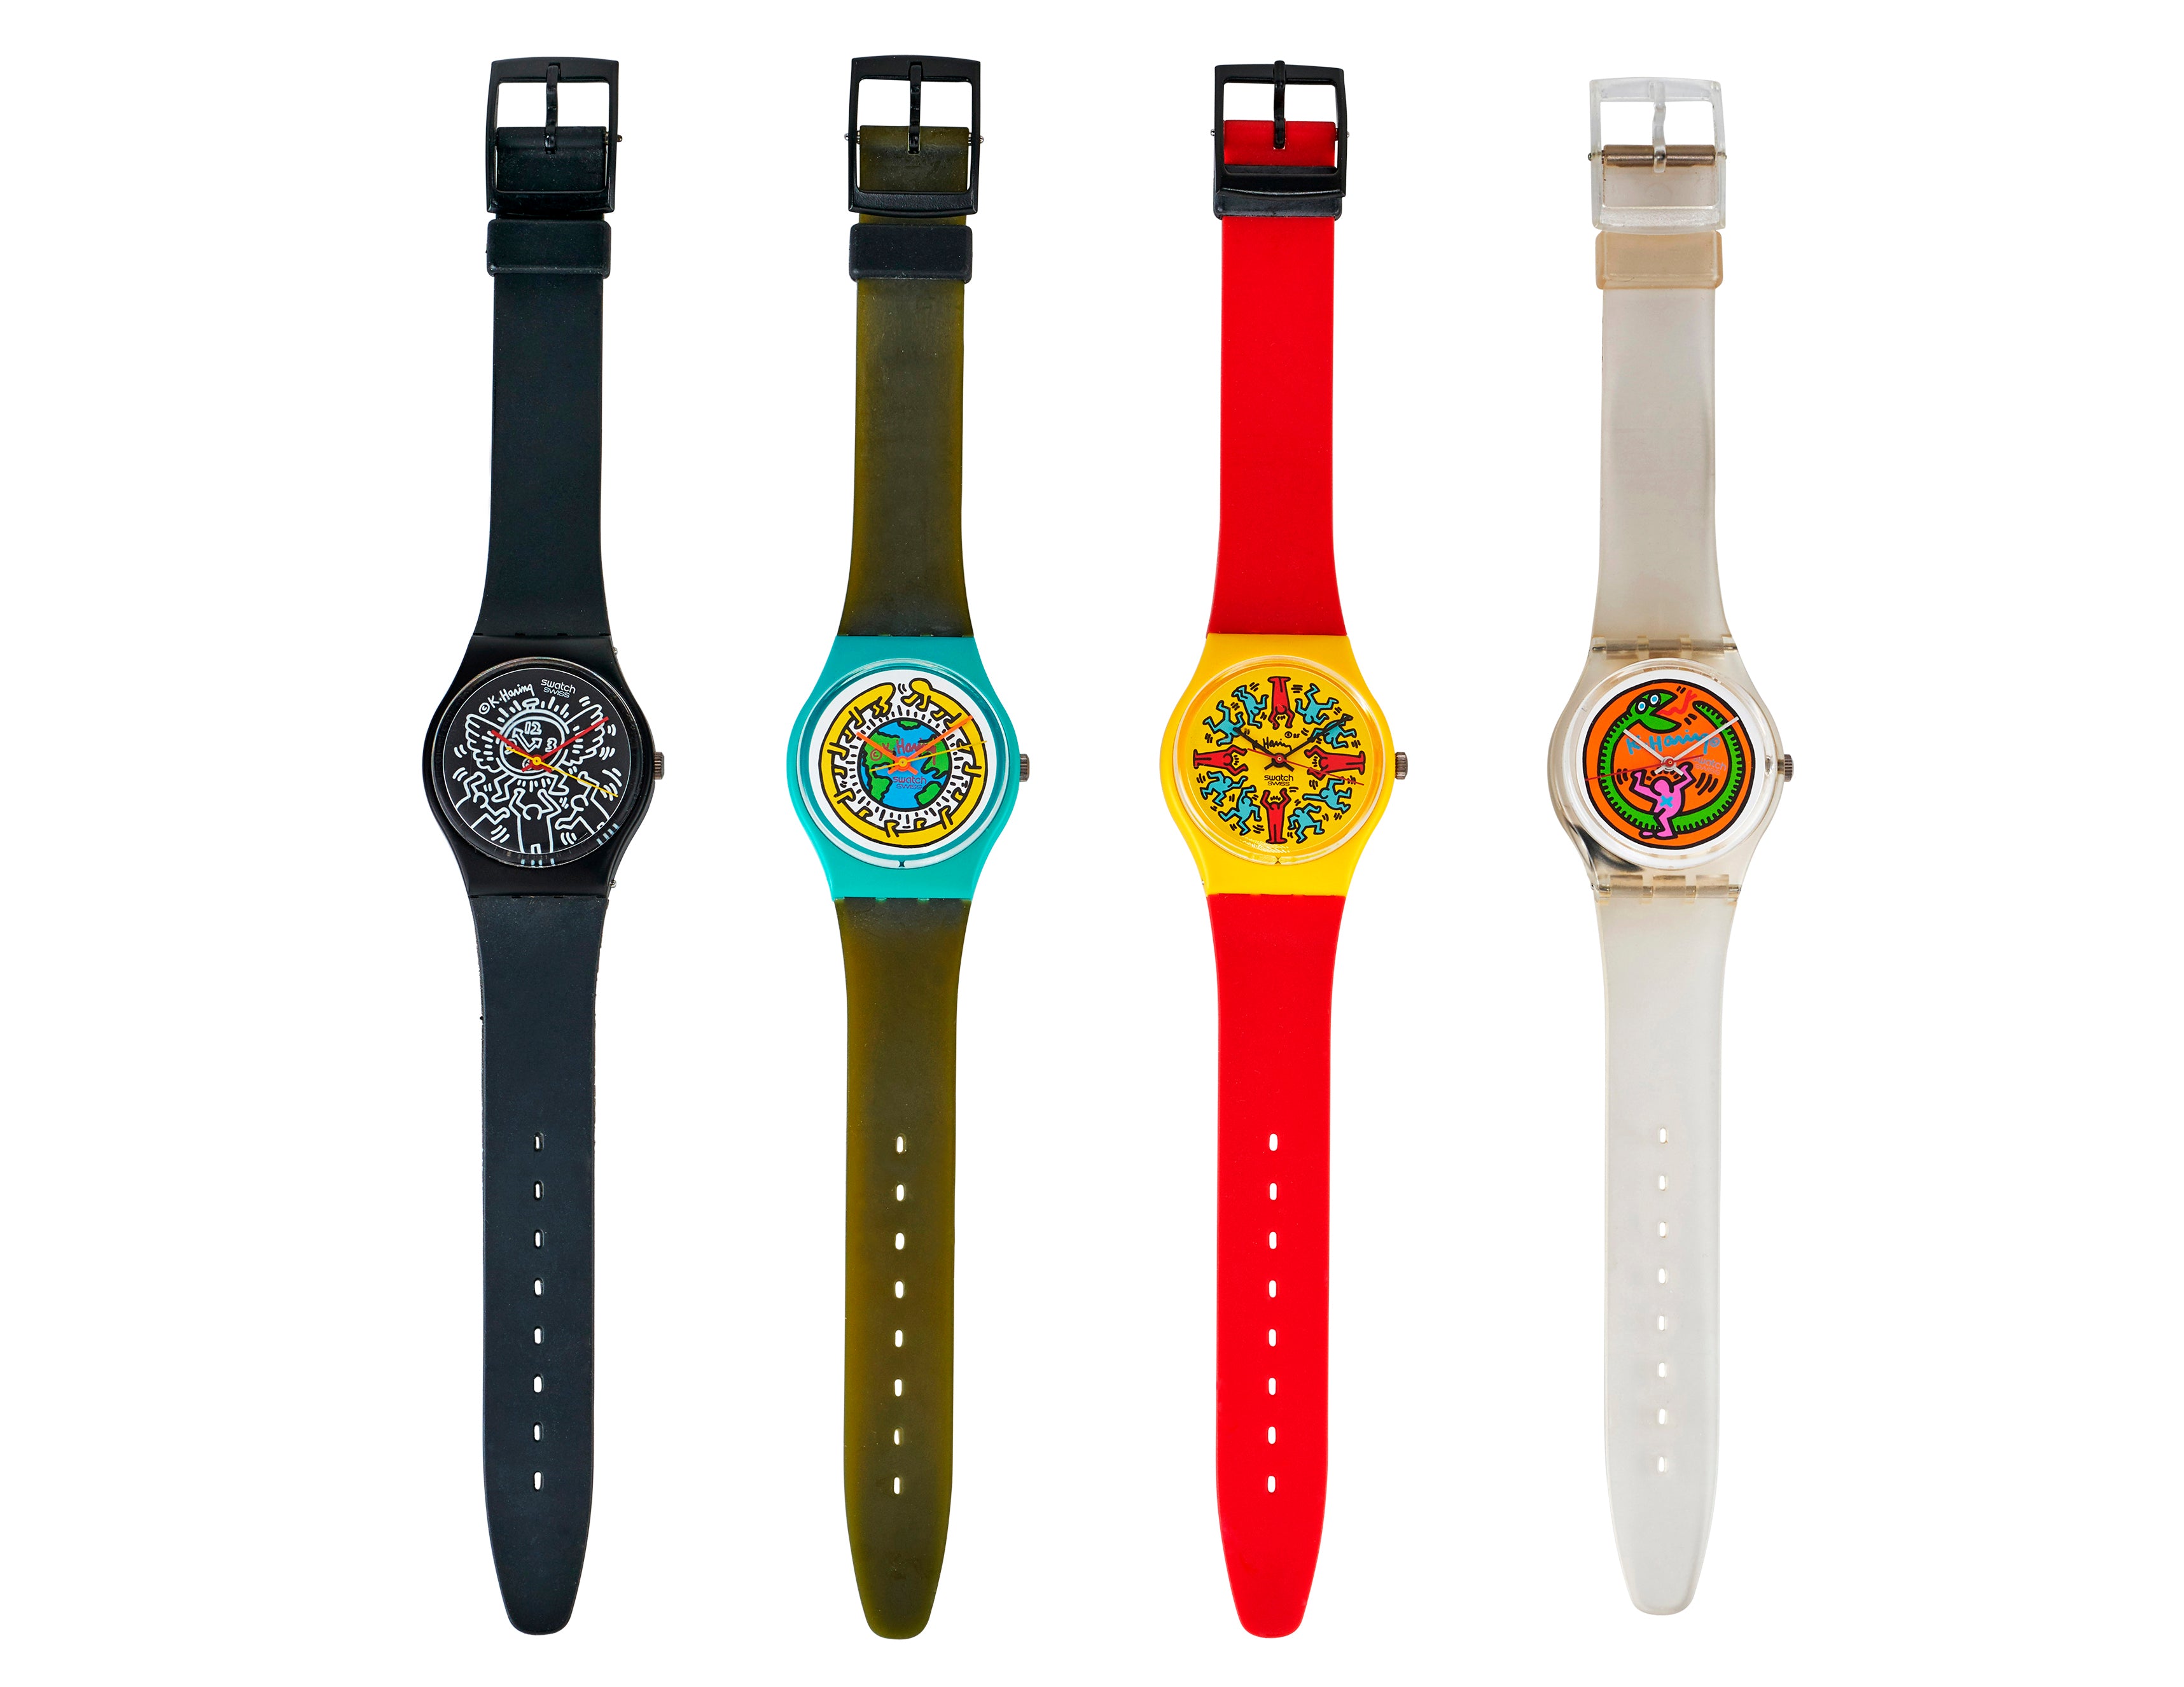 Swatch X Keith Haring four watch collaboration set